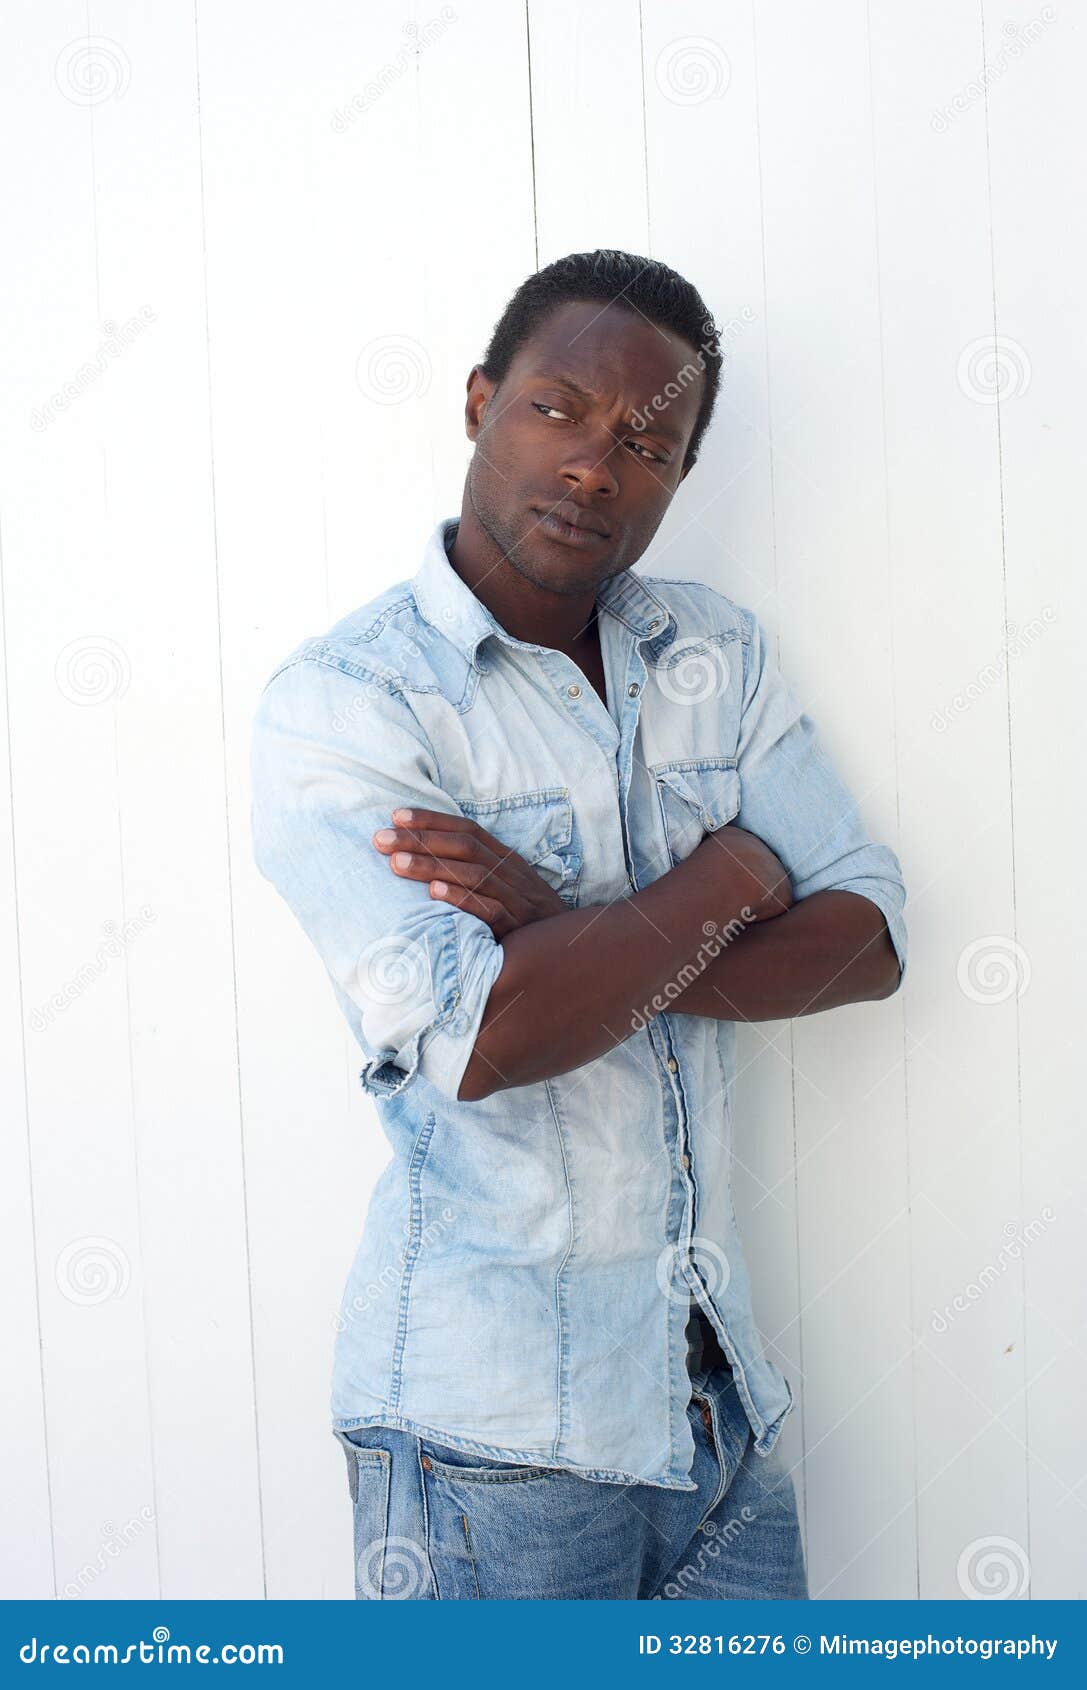 American Man Leaning Against Wall With Arms Crossed Stock Photo - Image